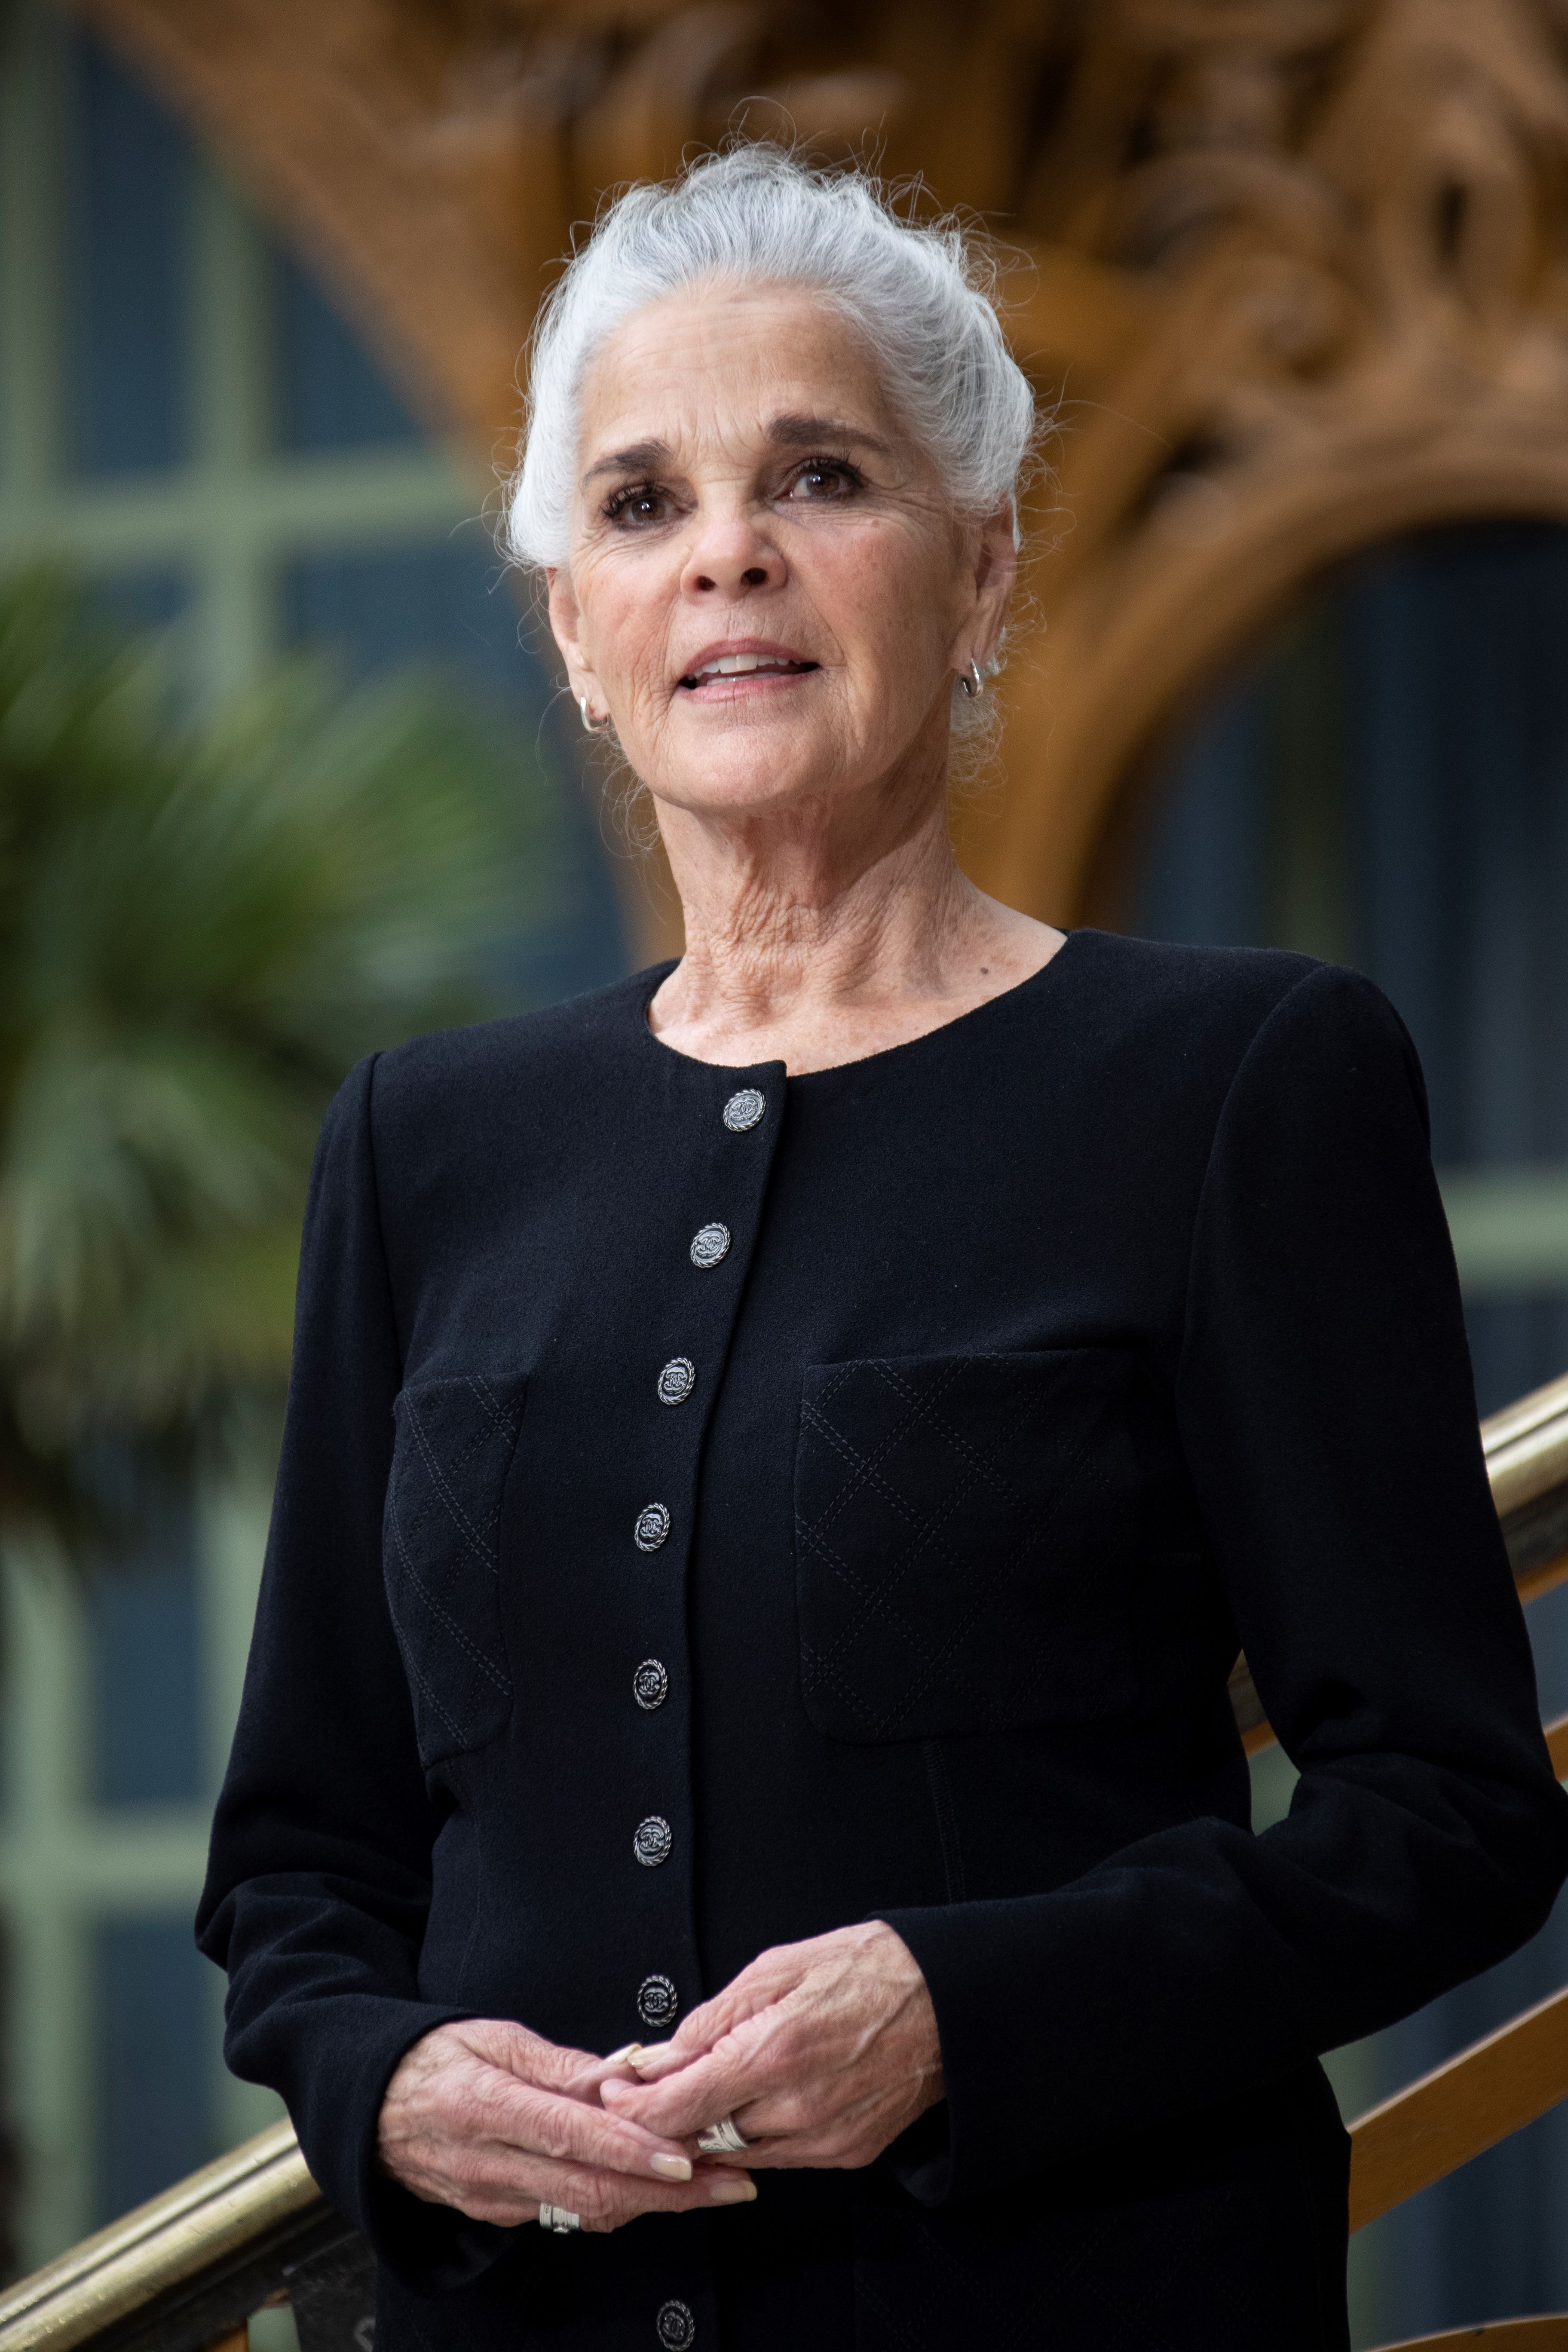 Ali MacGraw at the Grand Palais in Paris on May 3, 2019. | Source: Getty Images